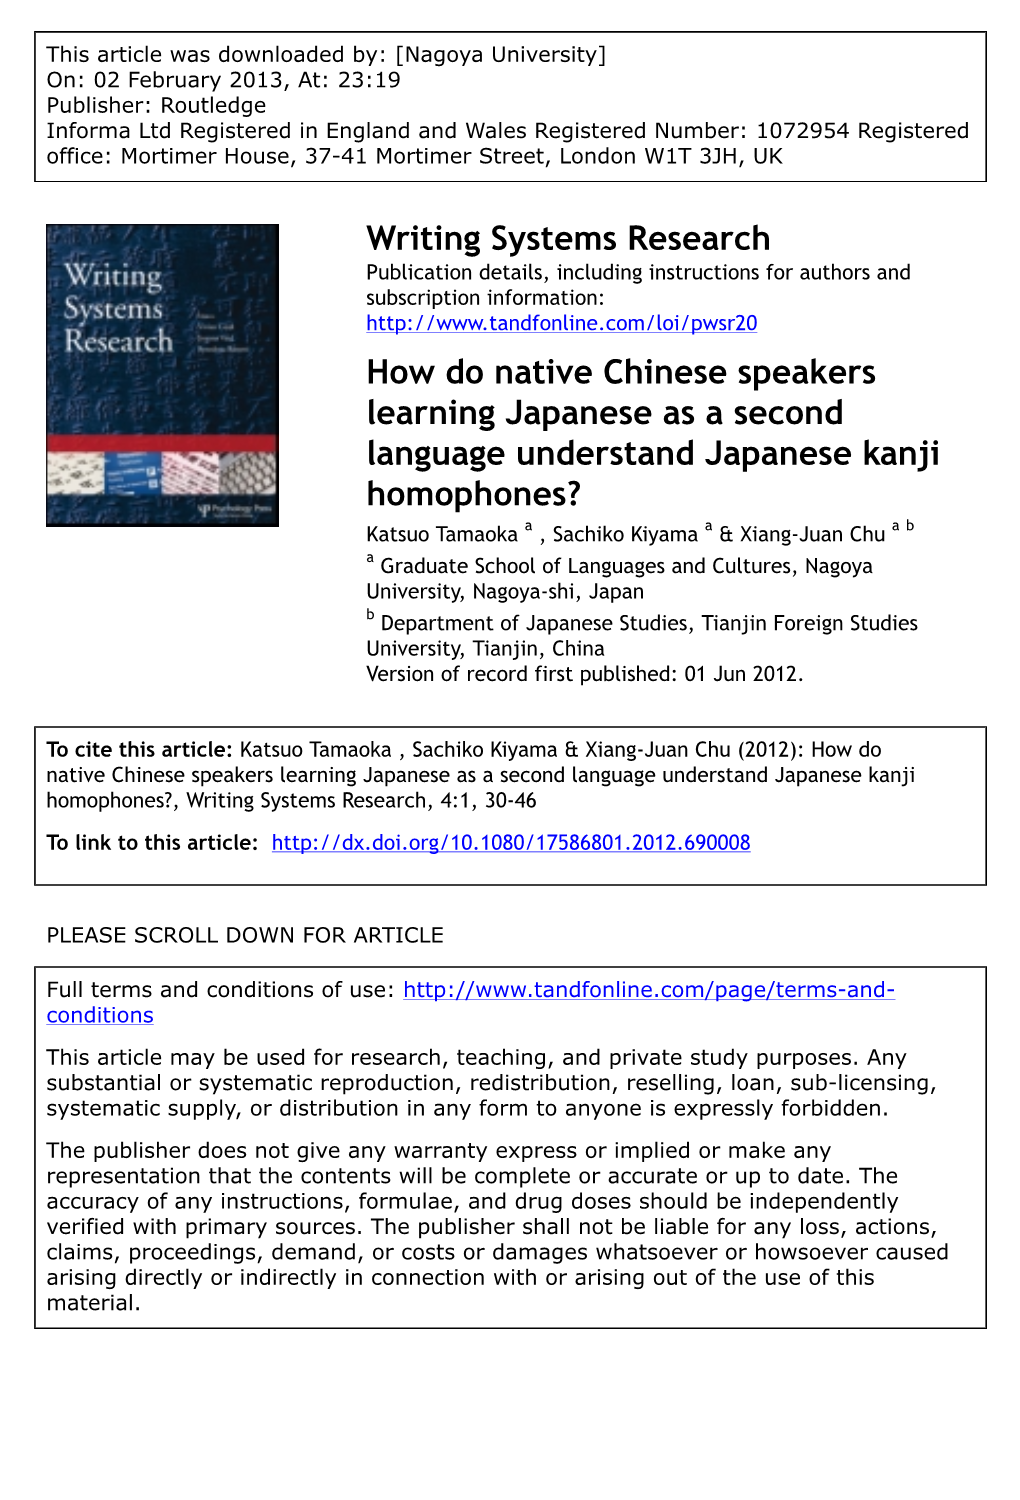 How Do Native Chinese Speakers Learning Japanese As a Second